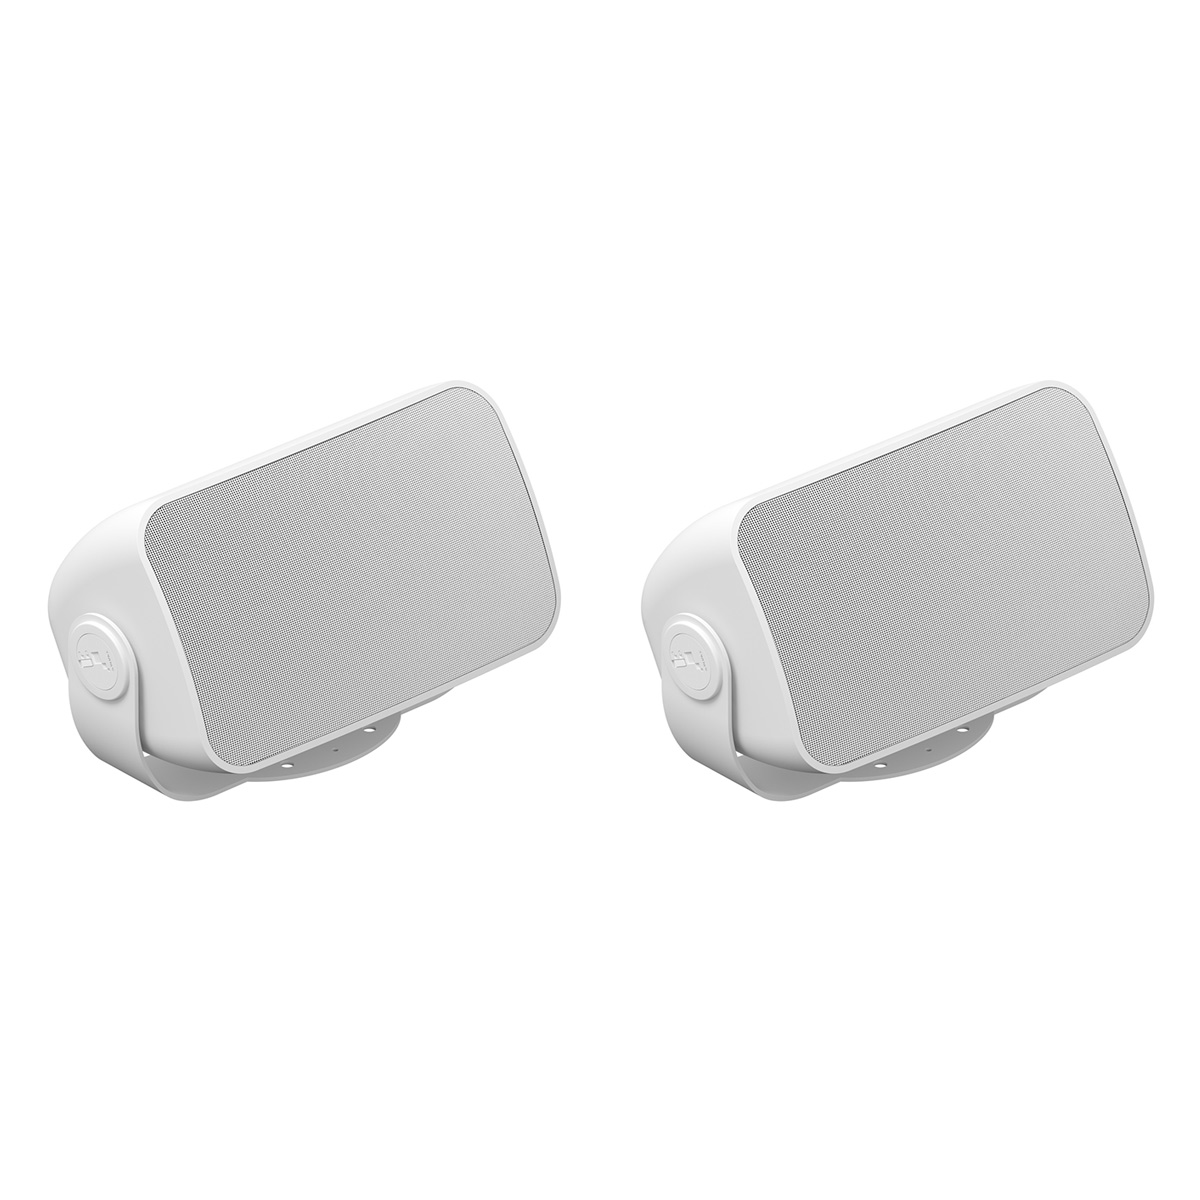 Sonos OUTDRWW1 Outdoor Architectural Speakers - Pair (White) - image 2 of 8